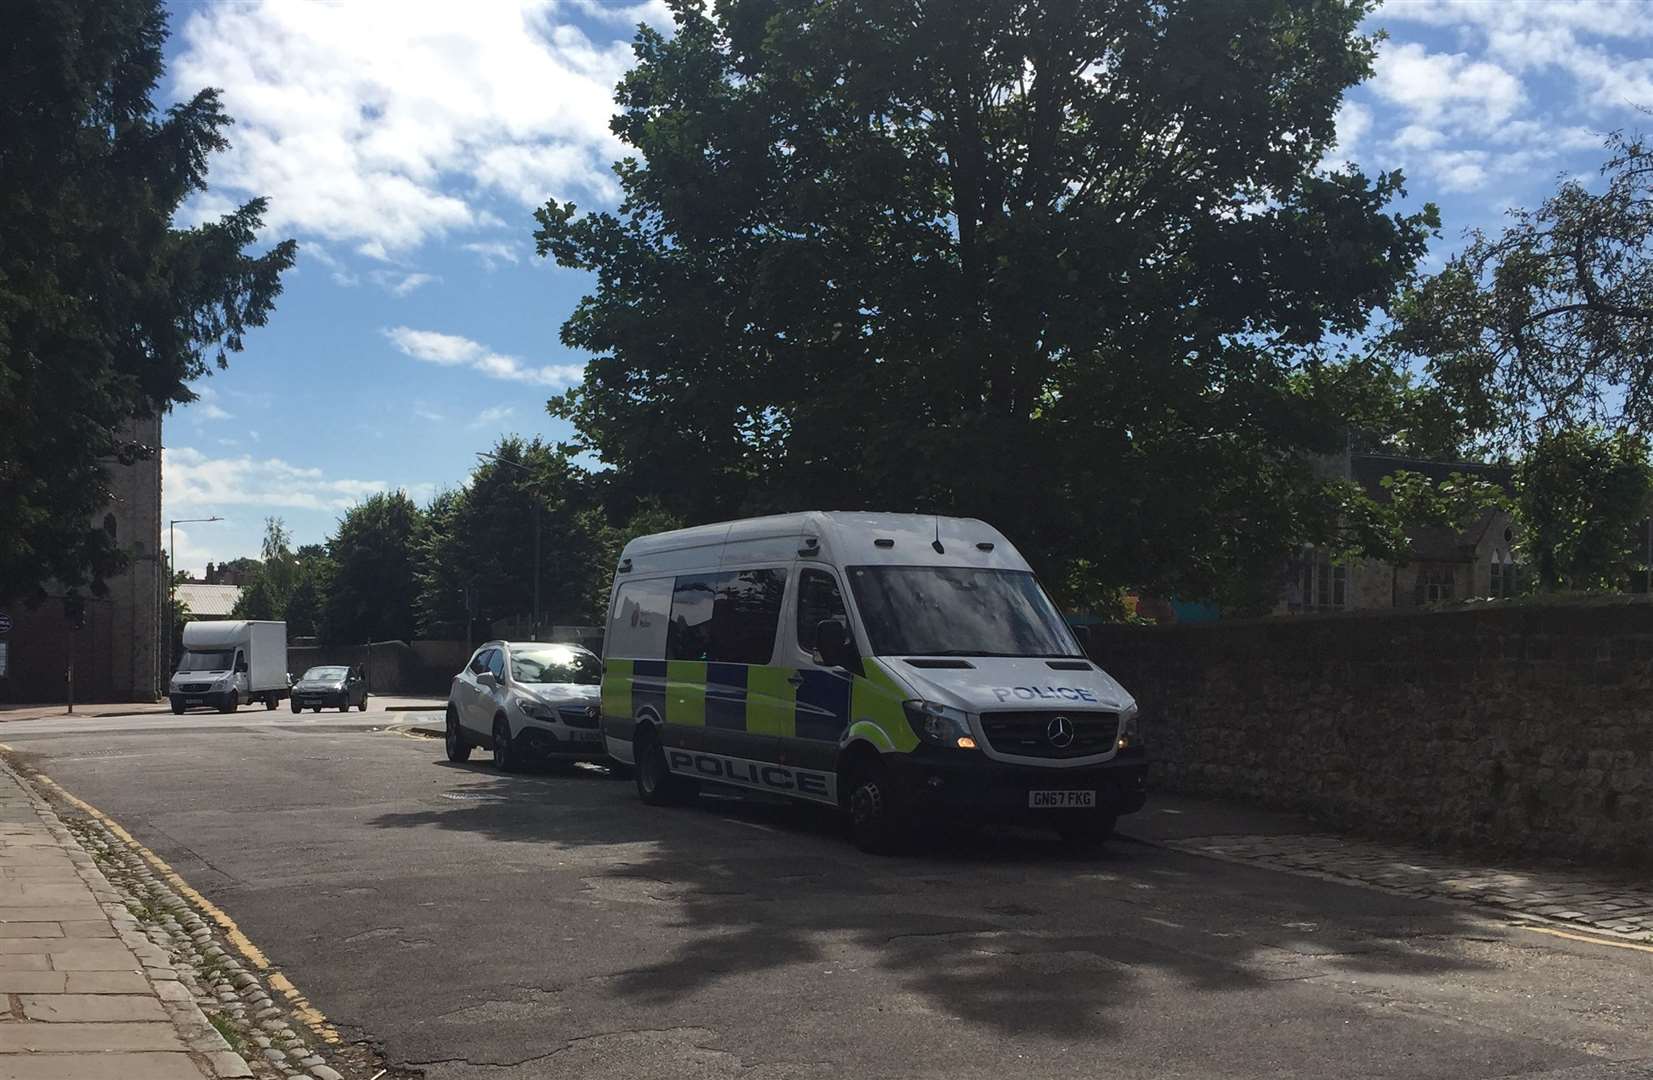 A police van near the Millennium Bridge at Lockmeadow in Maidstone where a woman was allegedly raped this morning